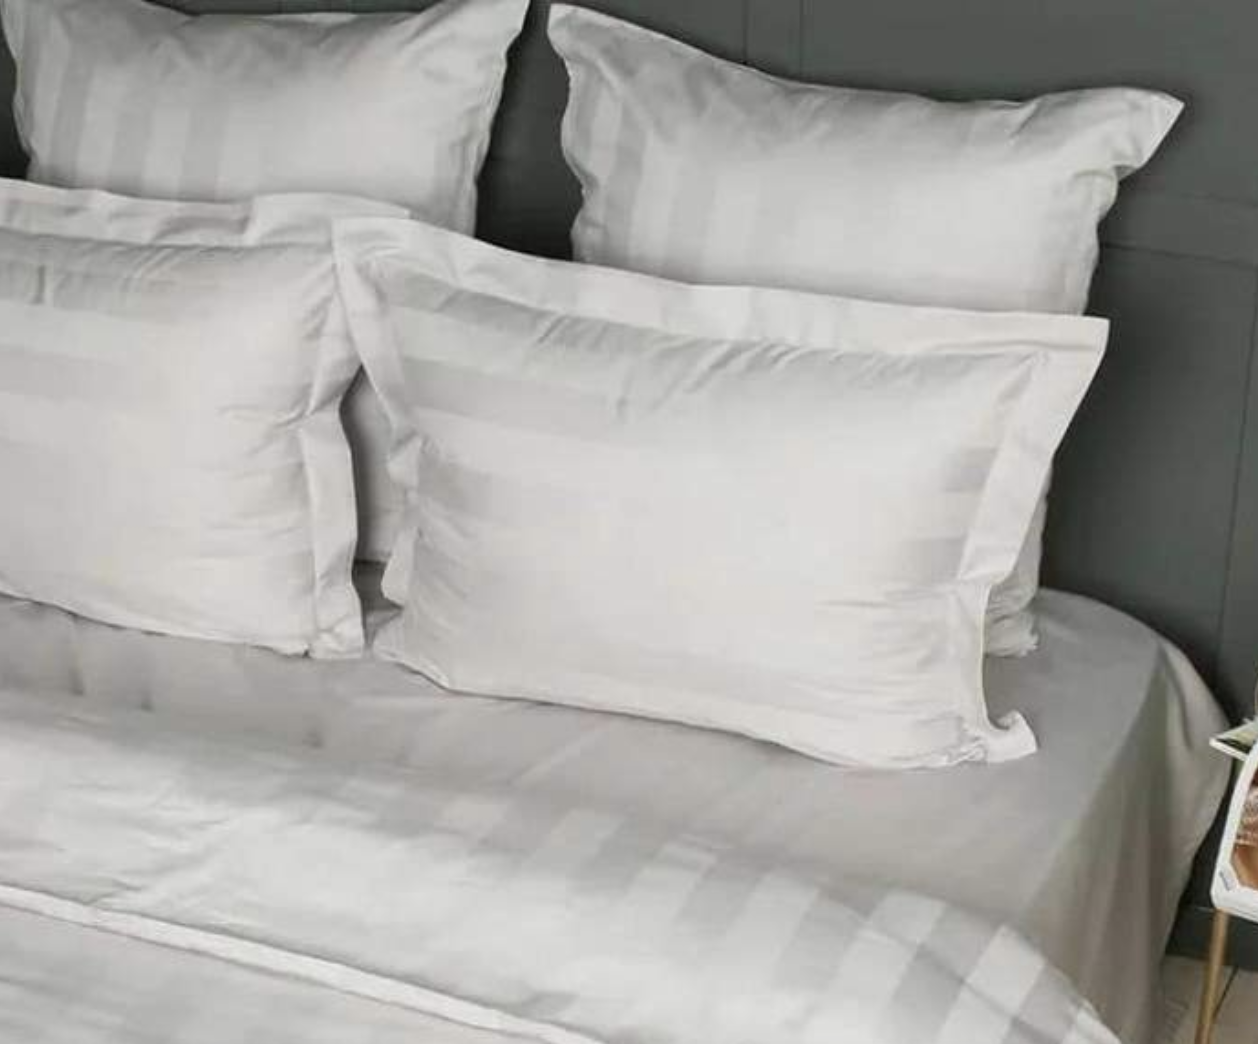 How Often Should You Change Your Bed Linens? A Guide for a Healthy Sleeping Environment